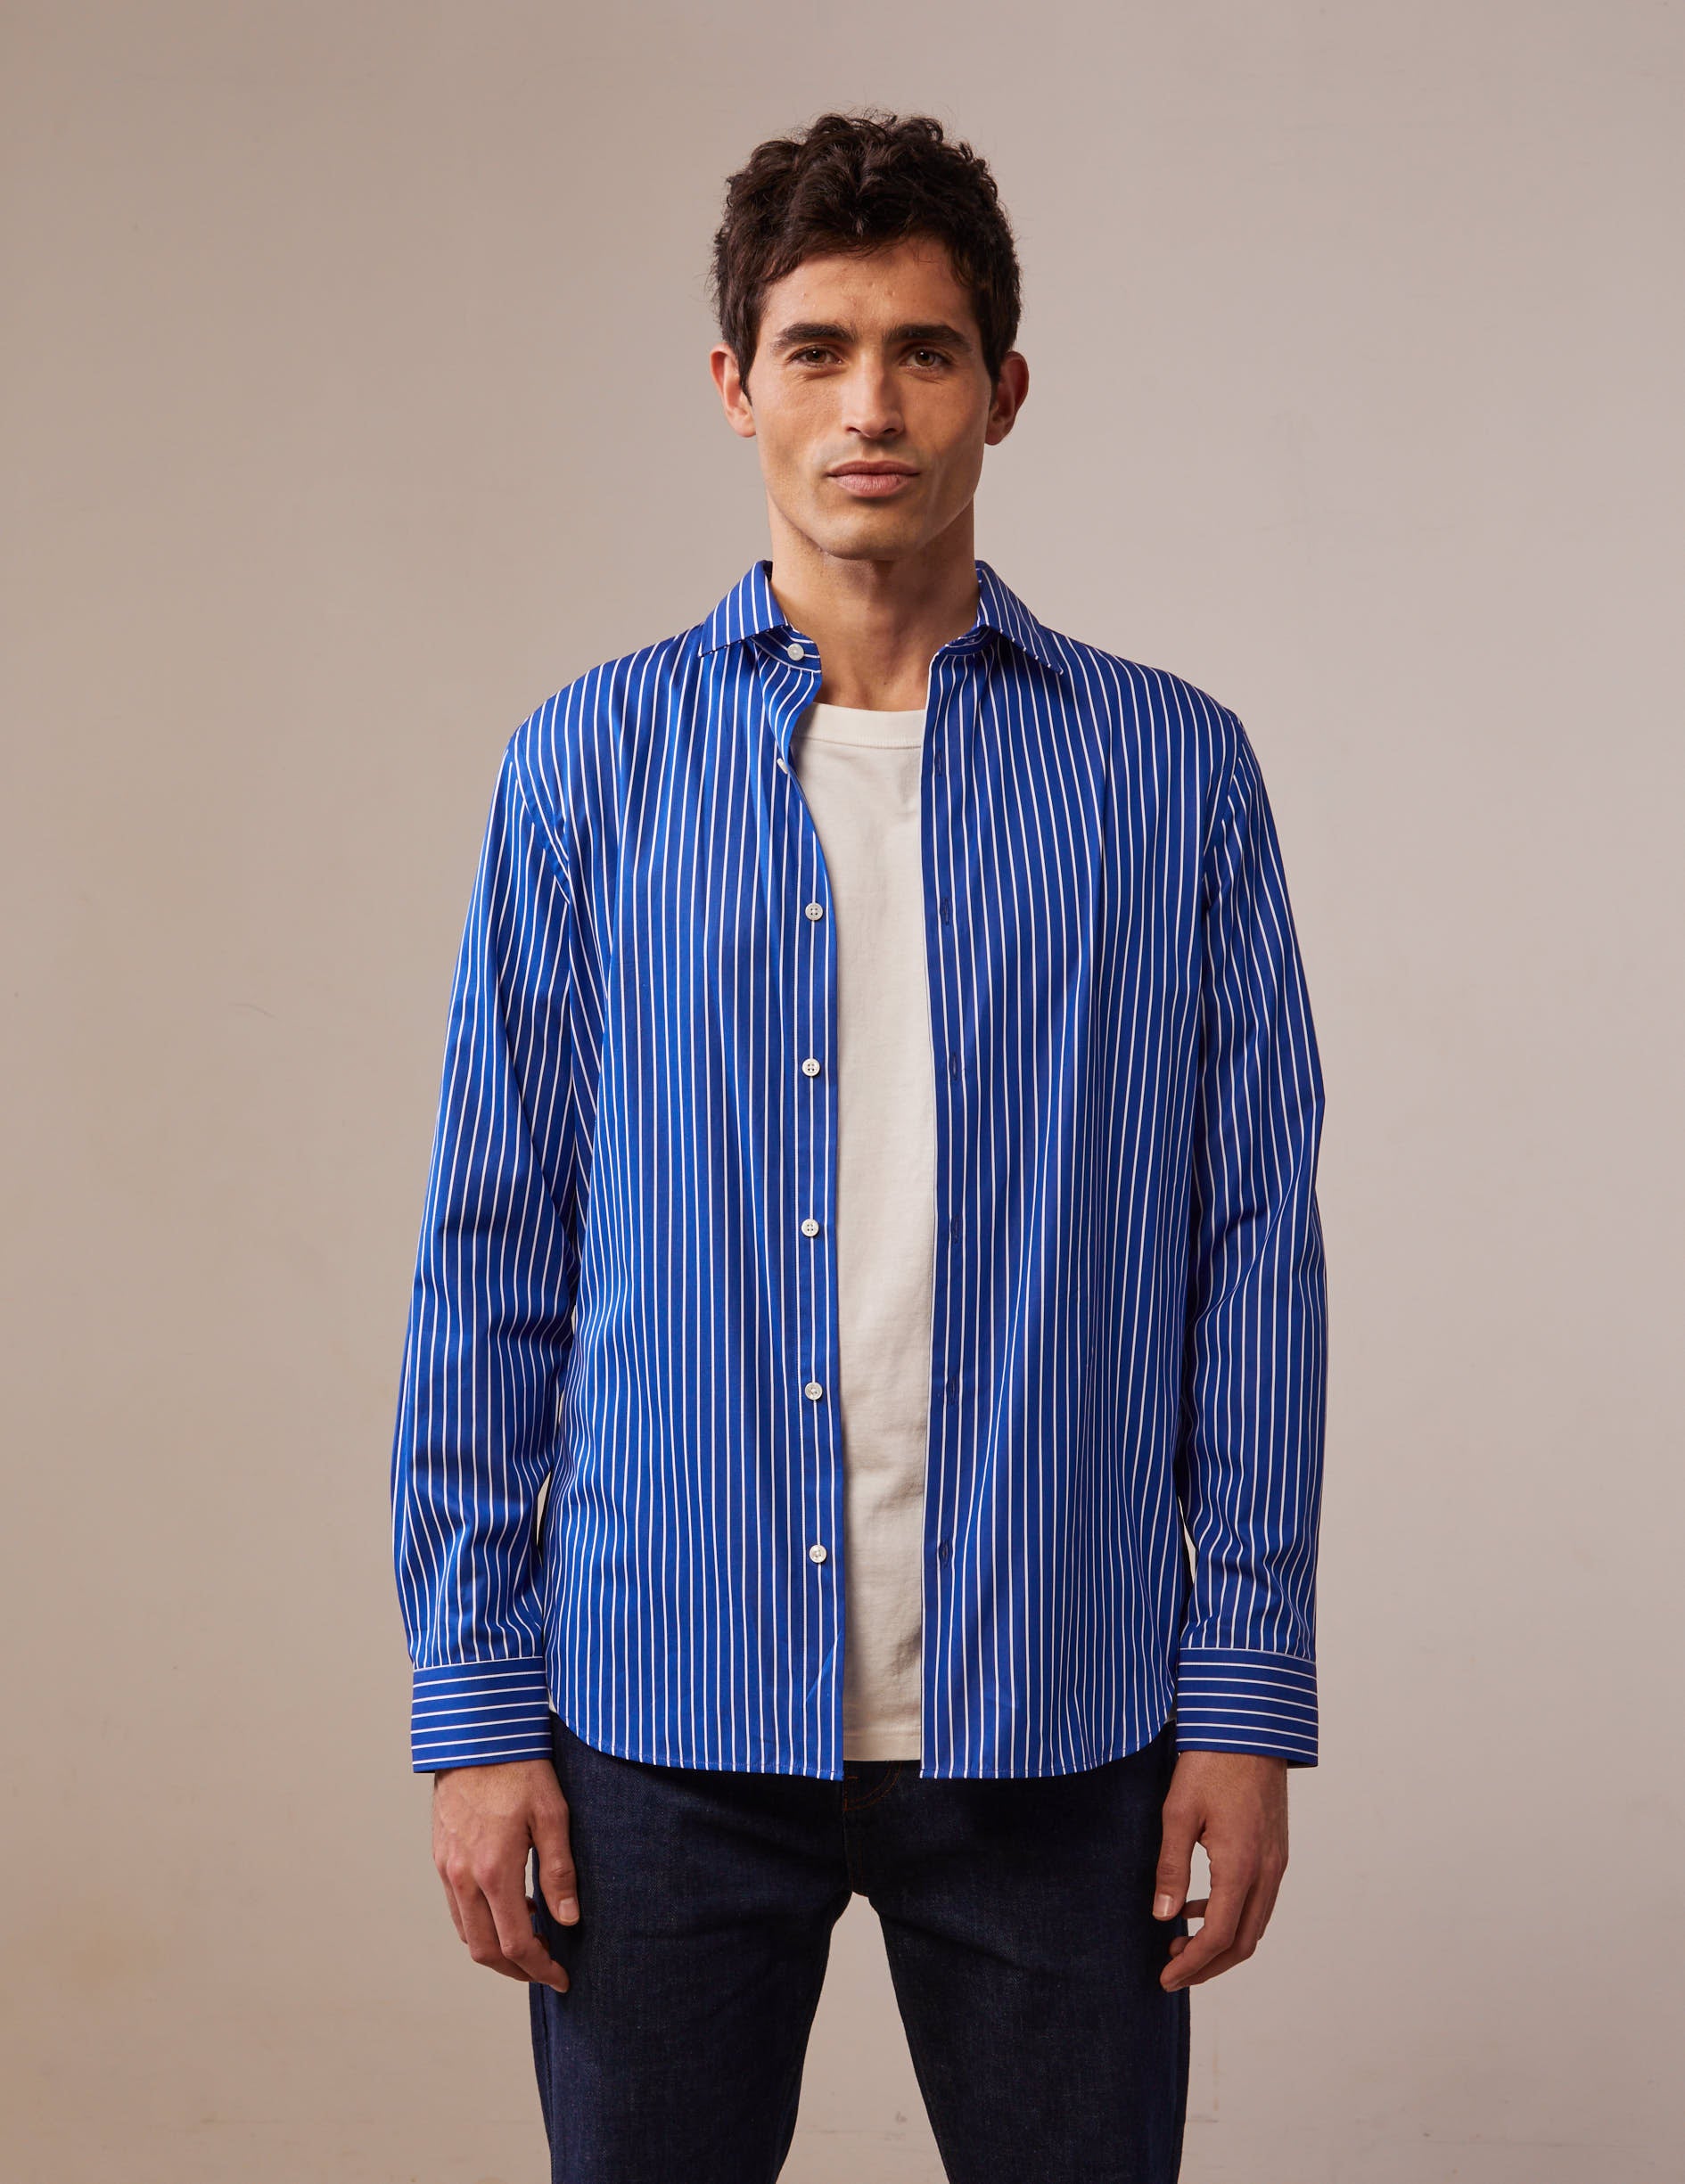  fitted navy Striped shirt - Poplin - Figaret Collar